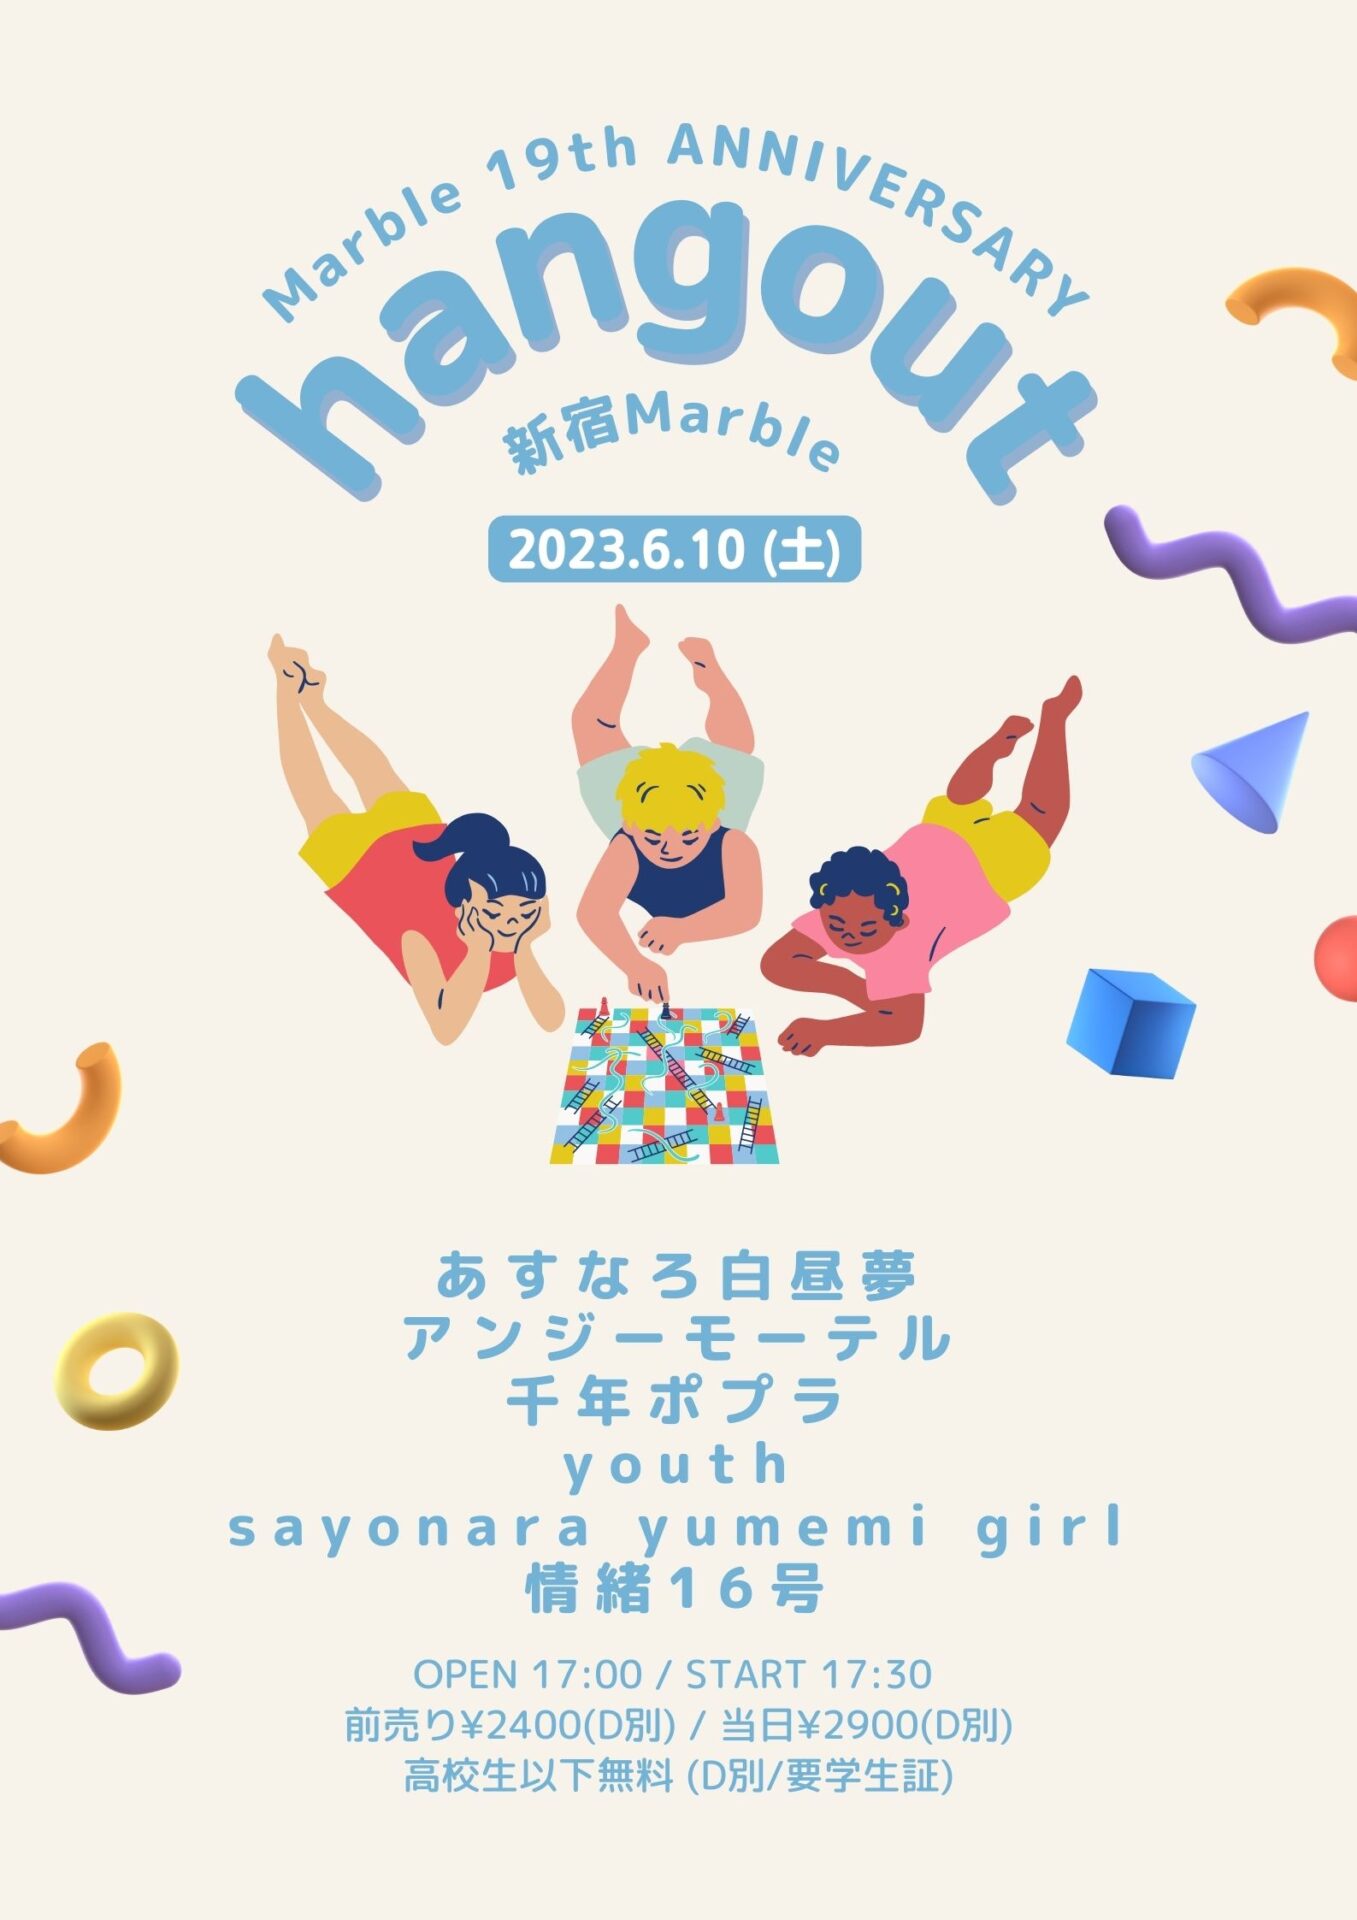 「Hangout」-Marble 19th ANNIVERSARY -